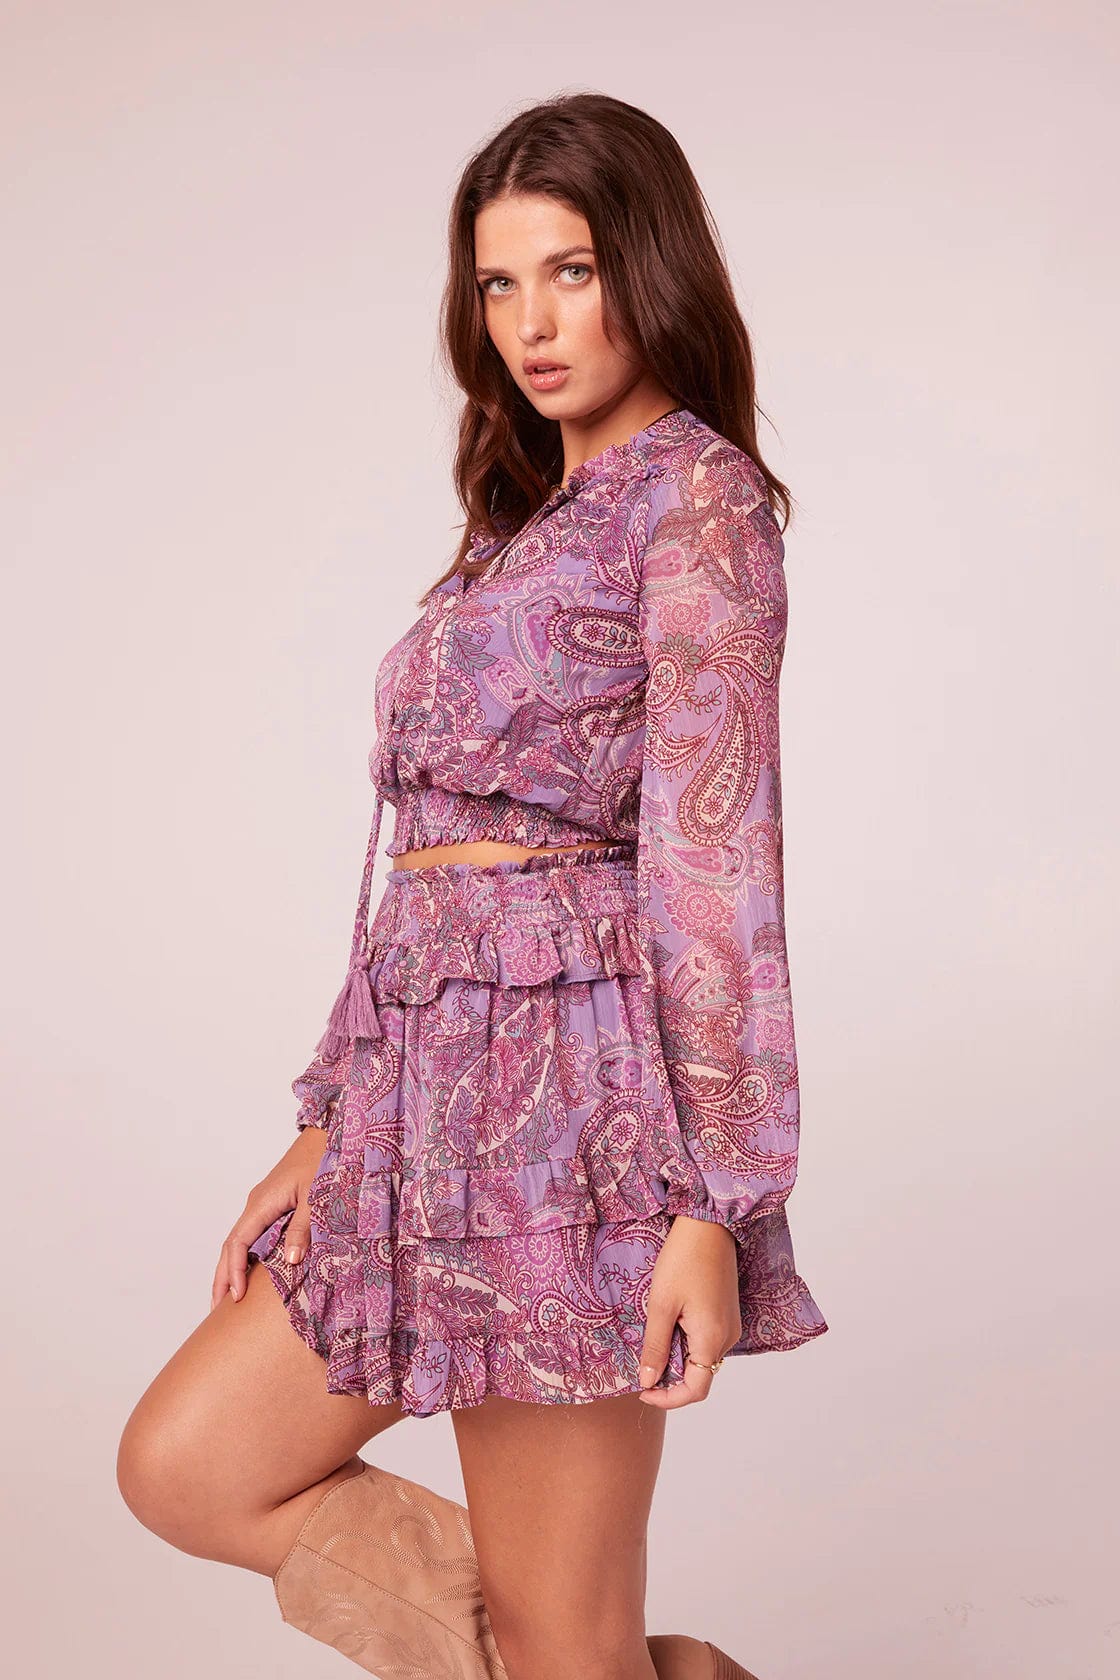 Band Of The Free Shyla Long Sleeve Lavender Paisley Chiffon Top - Women's Shirts & Tops - Blooming Daily